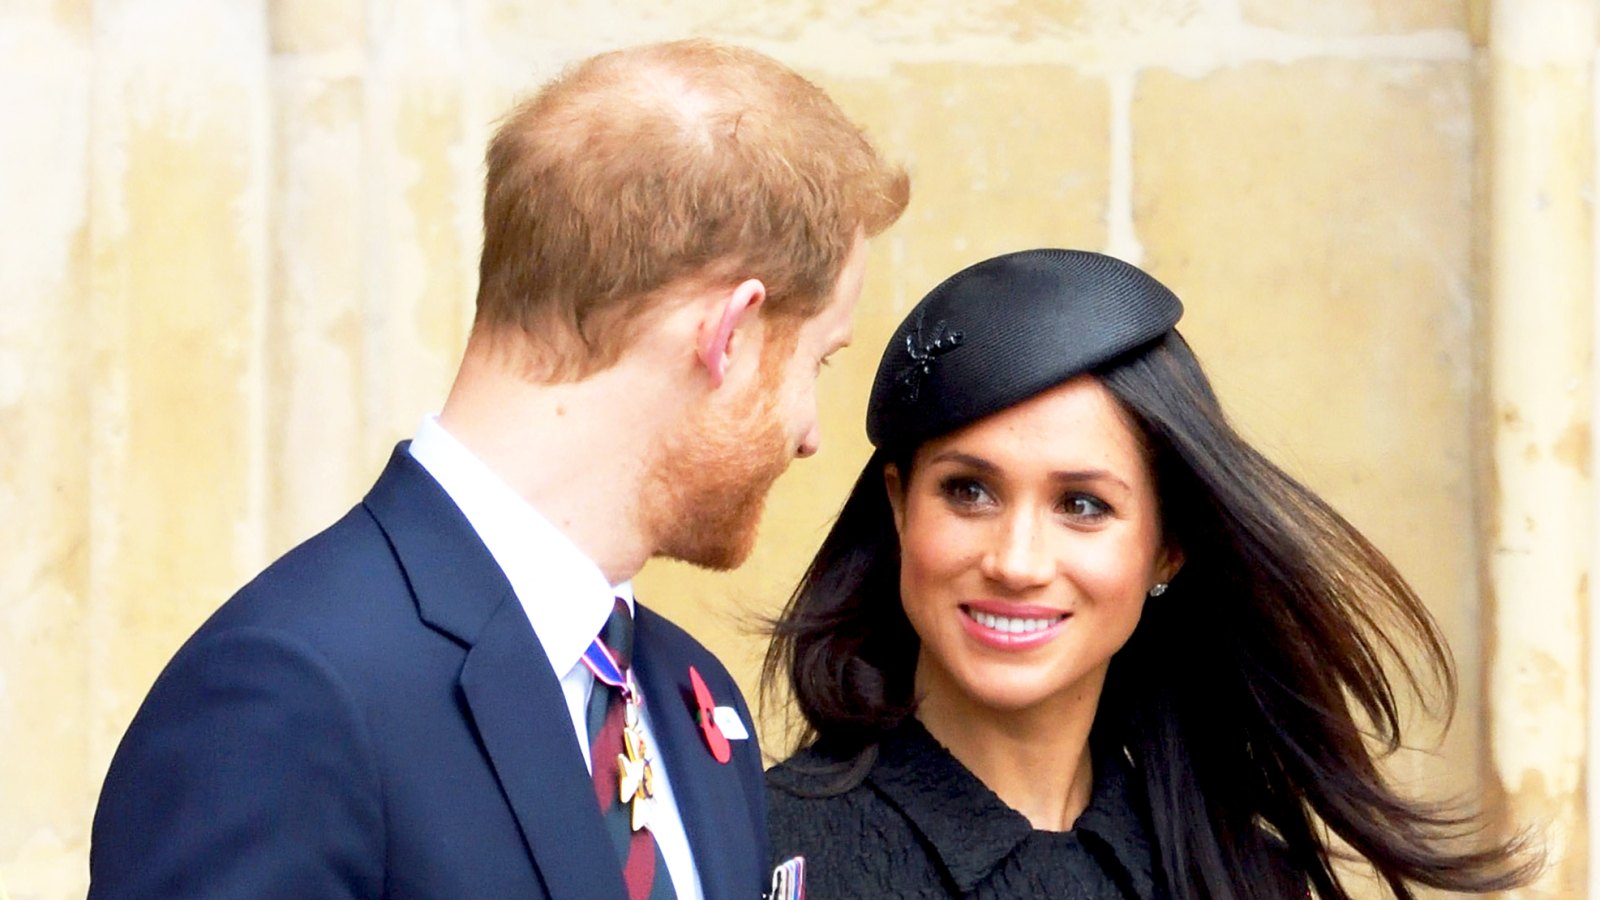 Prince Harry and Meghan Markle attend the Anzac Day service of Thanksgiving and Commemoration at Westminster Abbey on April 25, 2018 in London, England.